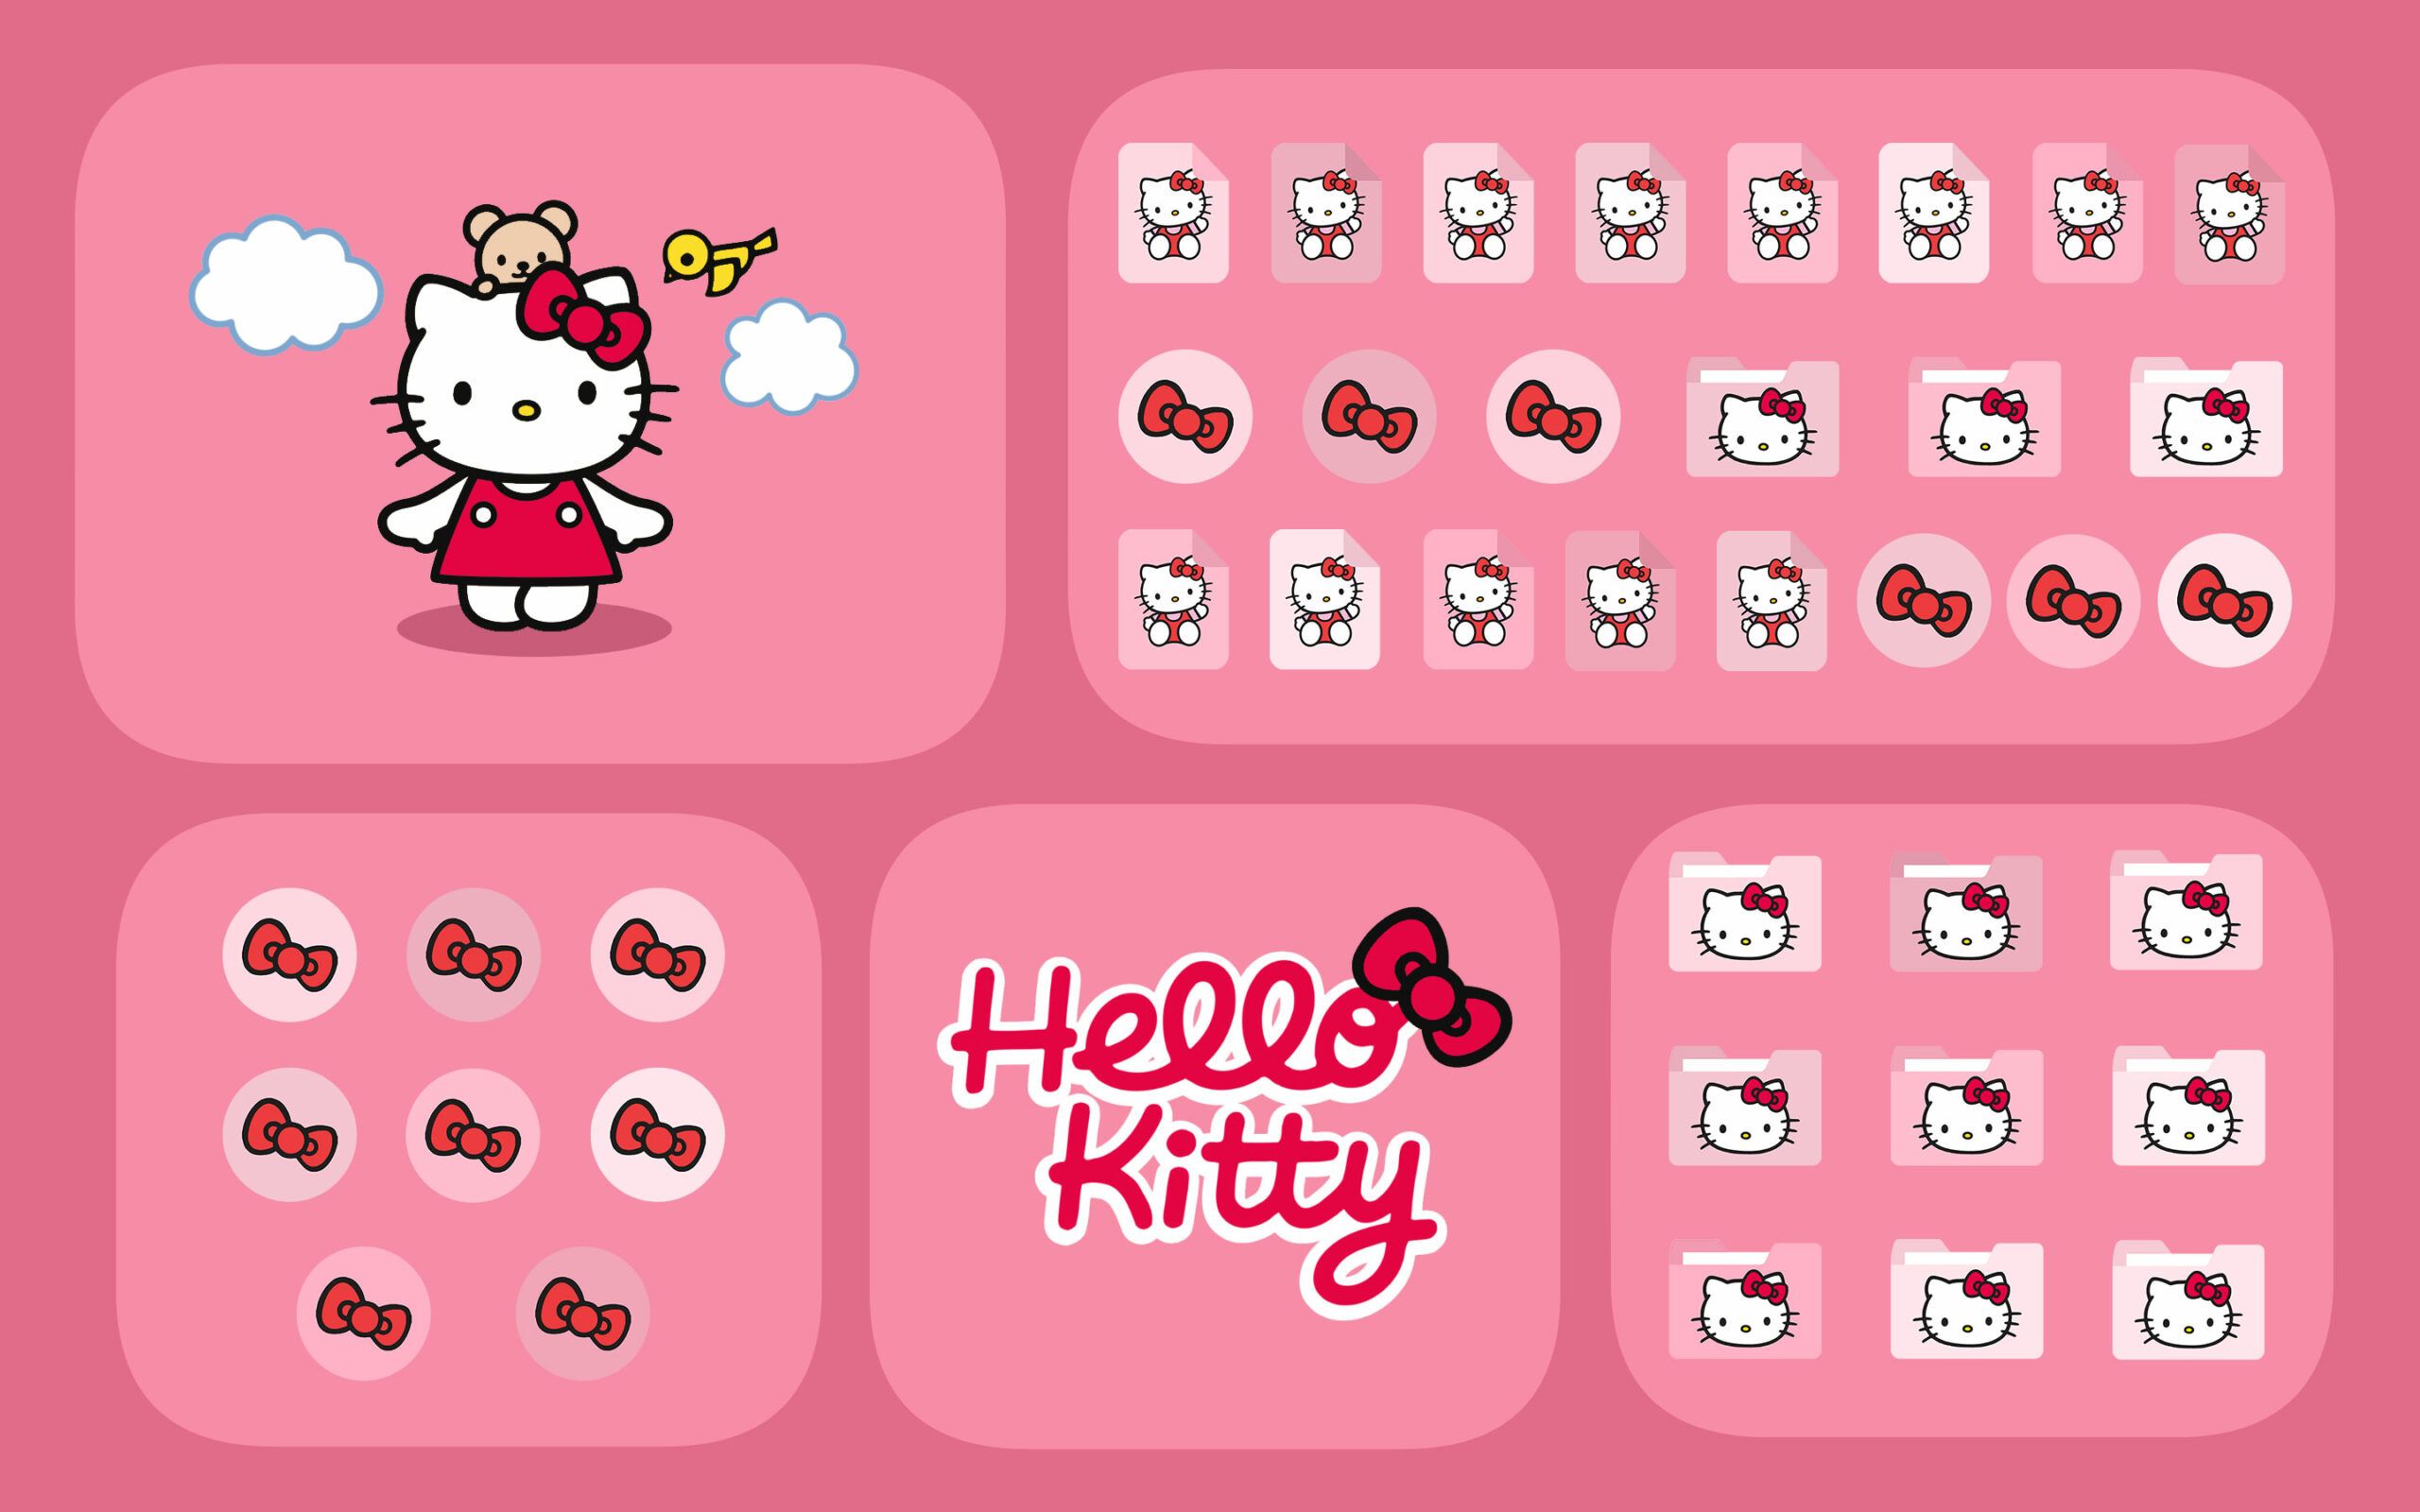 A Hello Kitty wallpaper with many Hello Kitty images on it - Sanrio